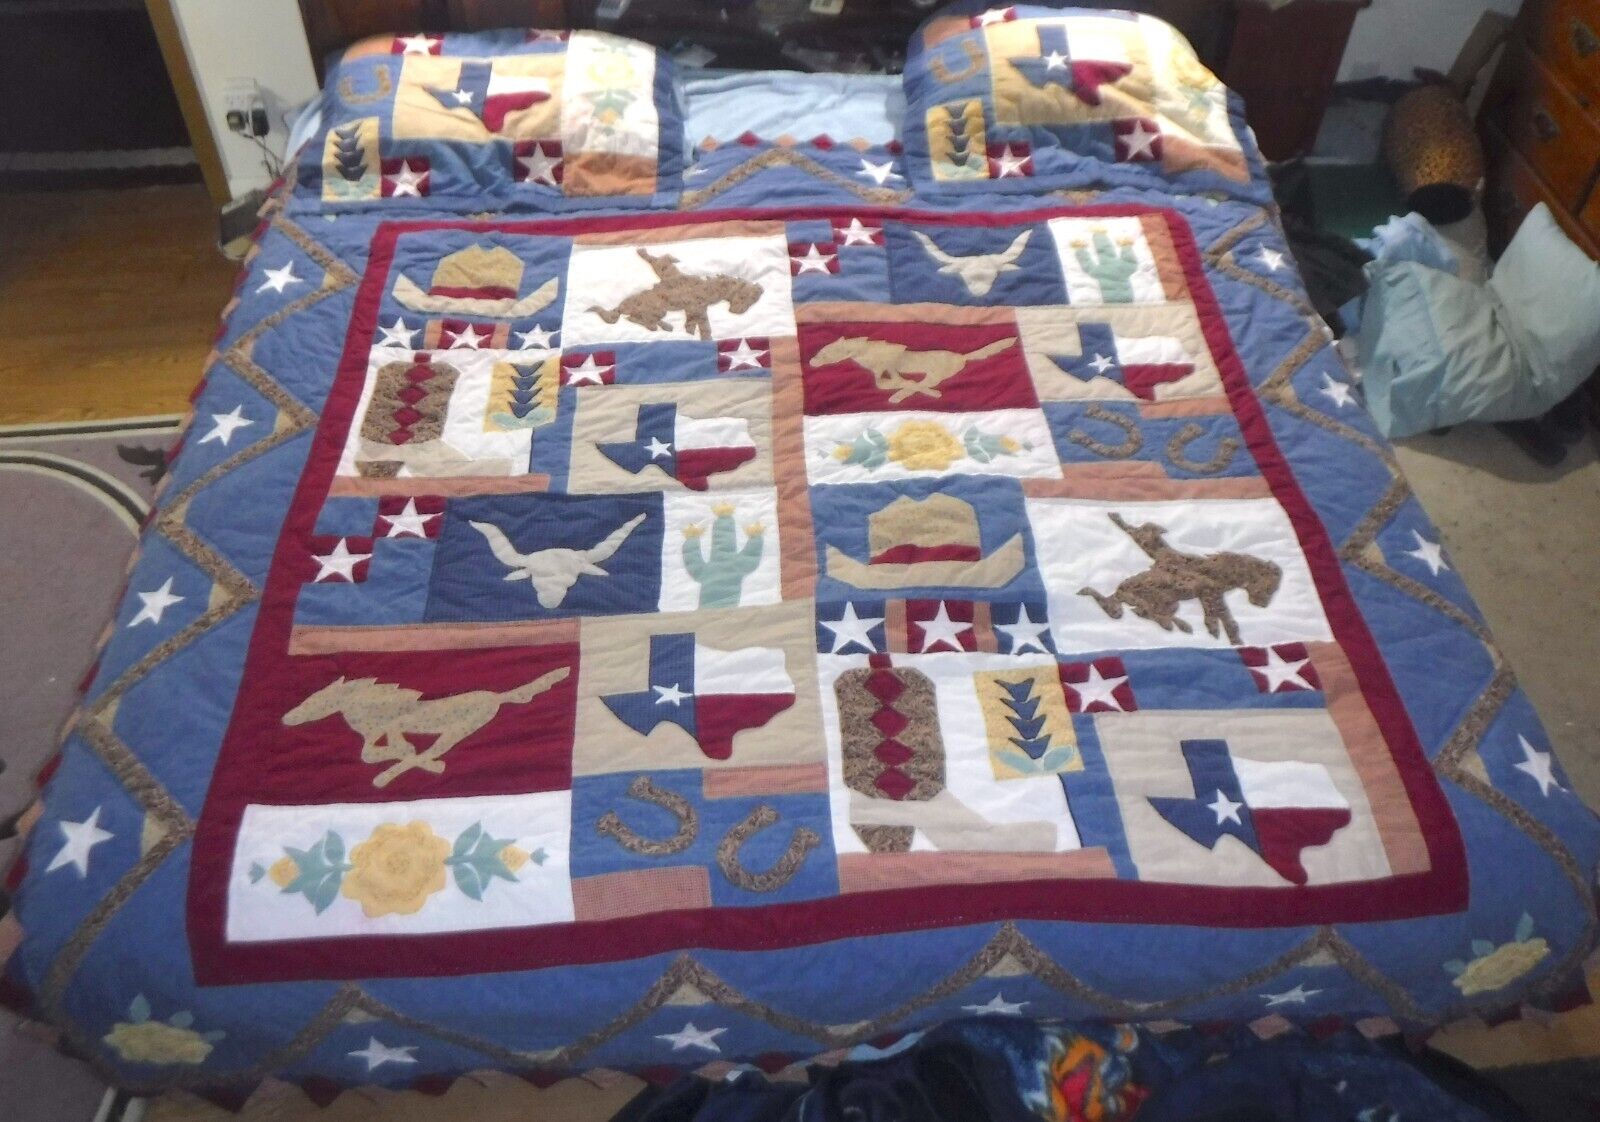 Texas themed hand stitched Quilt